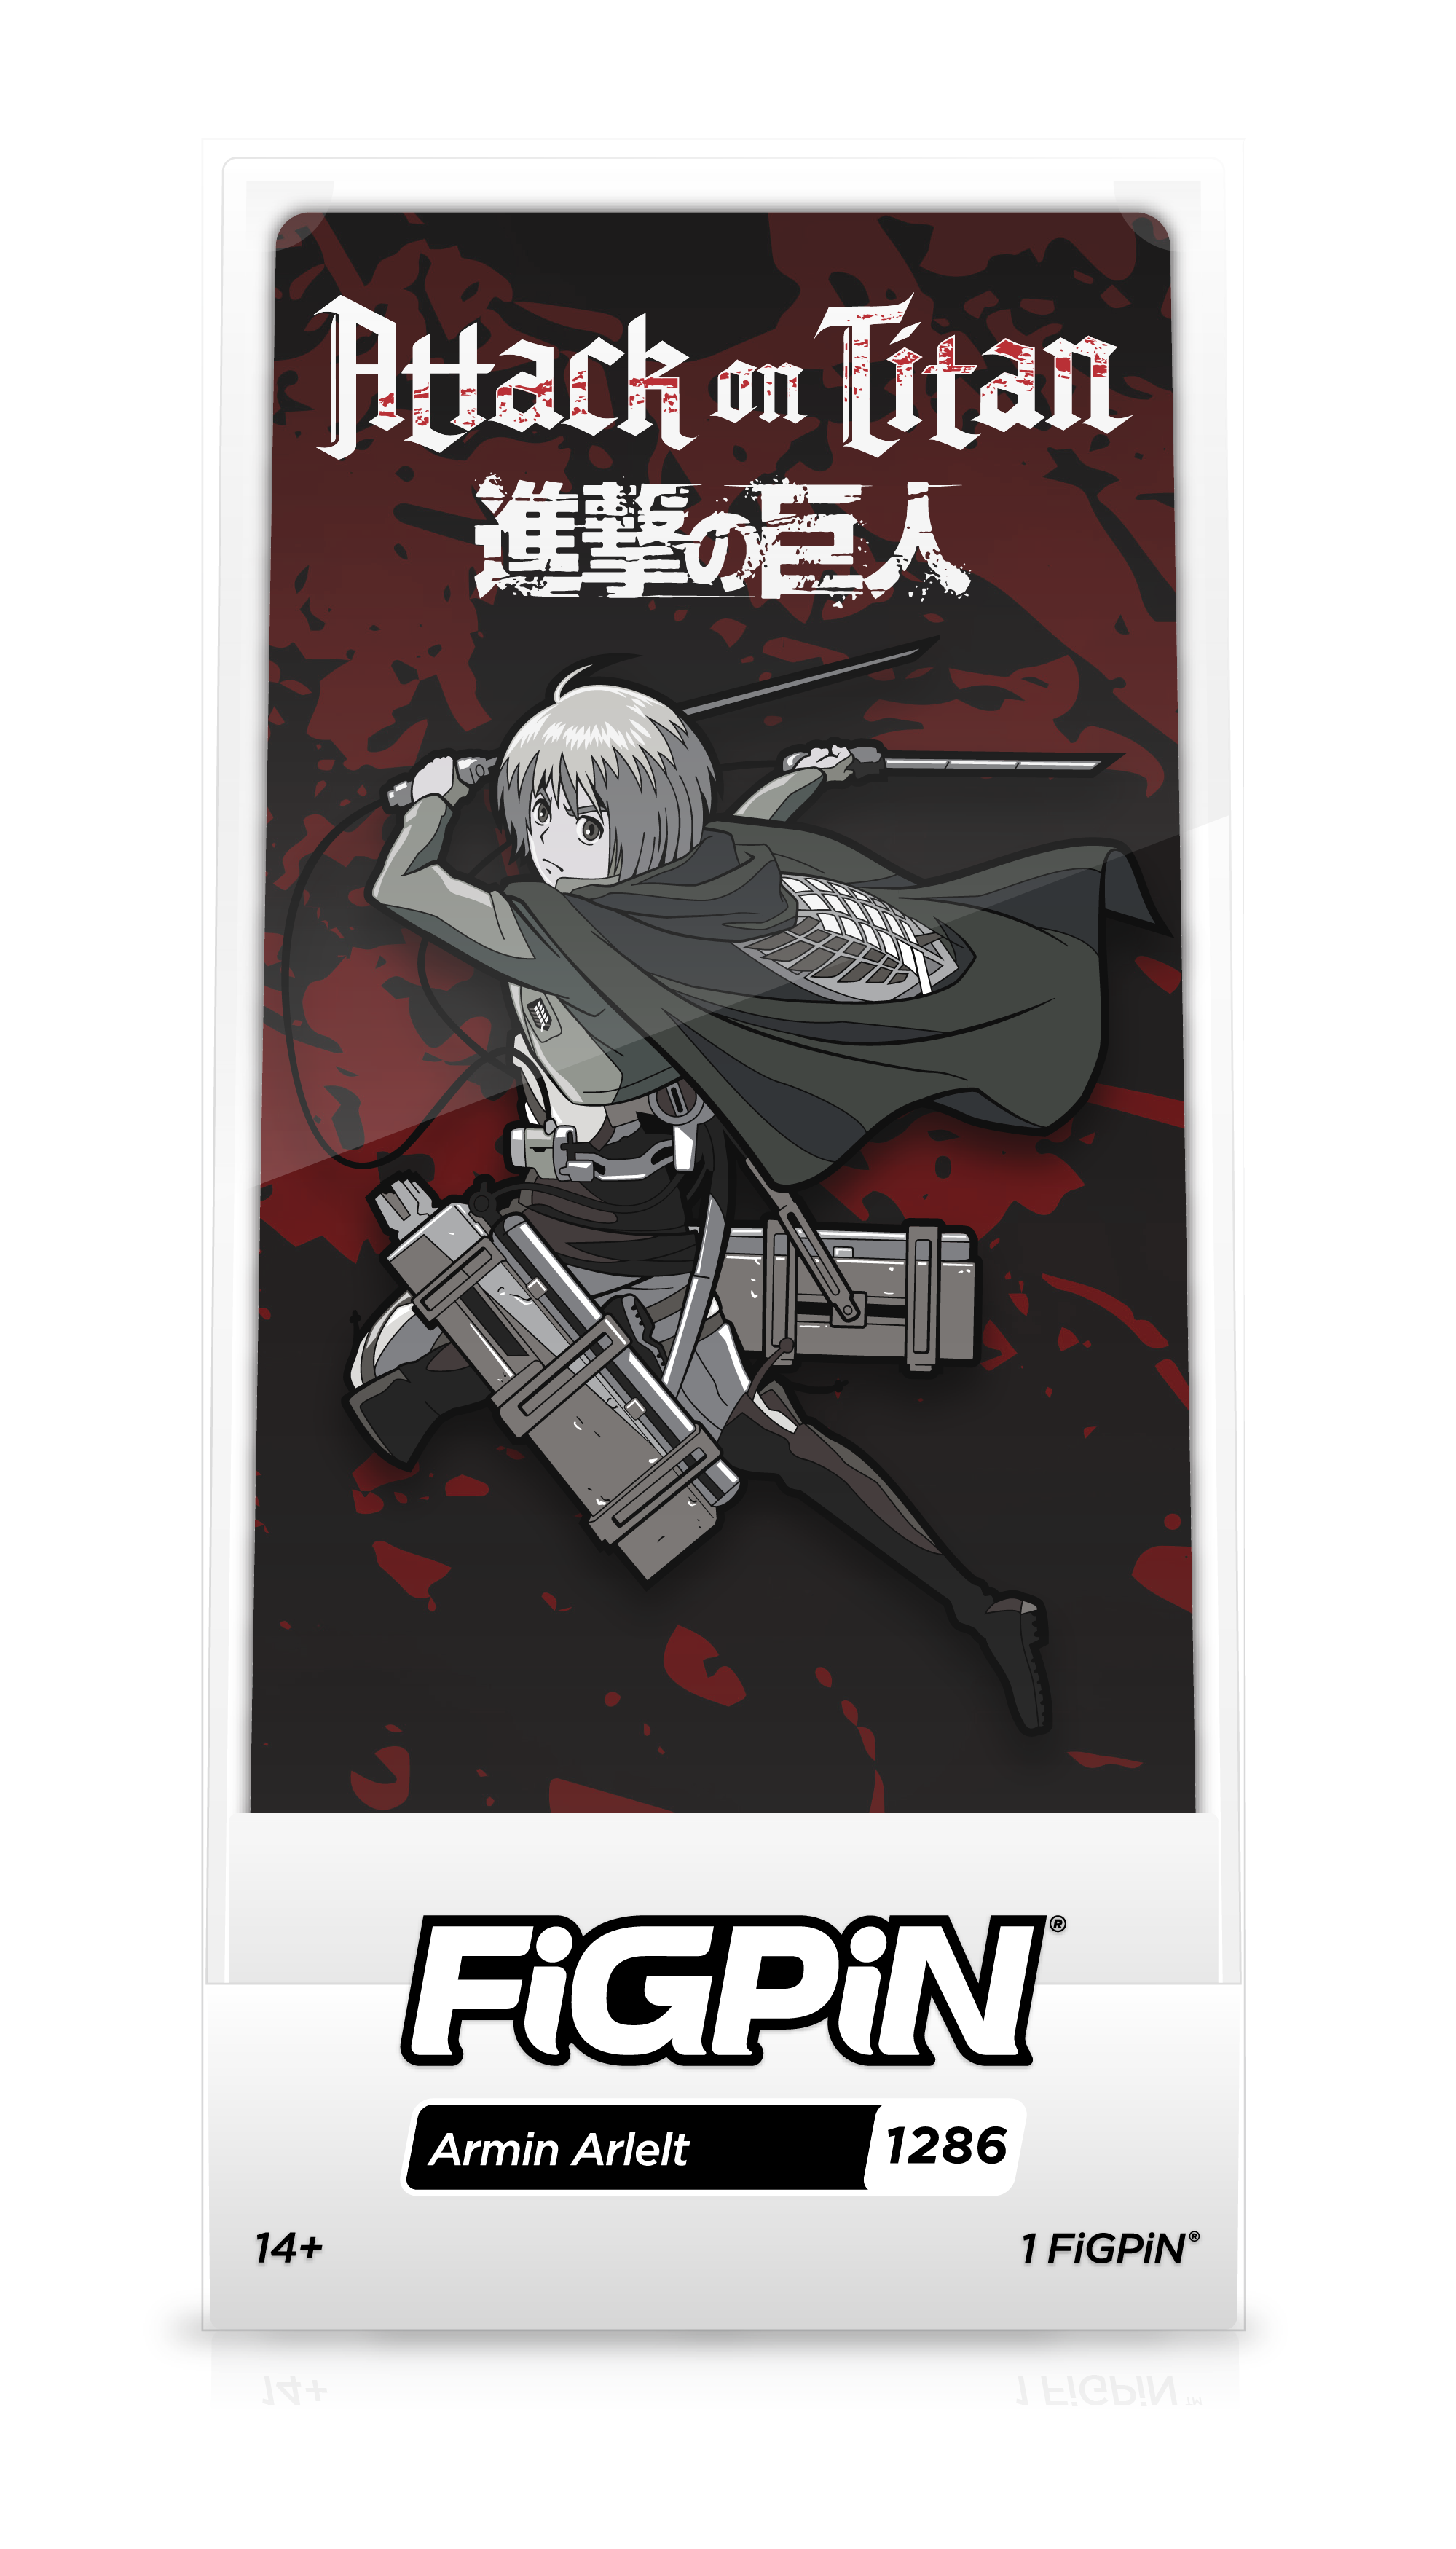 Front view of Attack on Titan's Arin Arlelt enamel pin inside FiGPiN Display case reading "FiGPiN - Arin Arlelt (1286)".